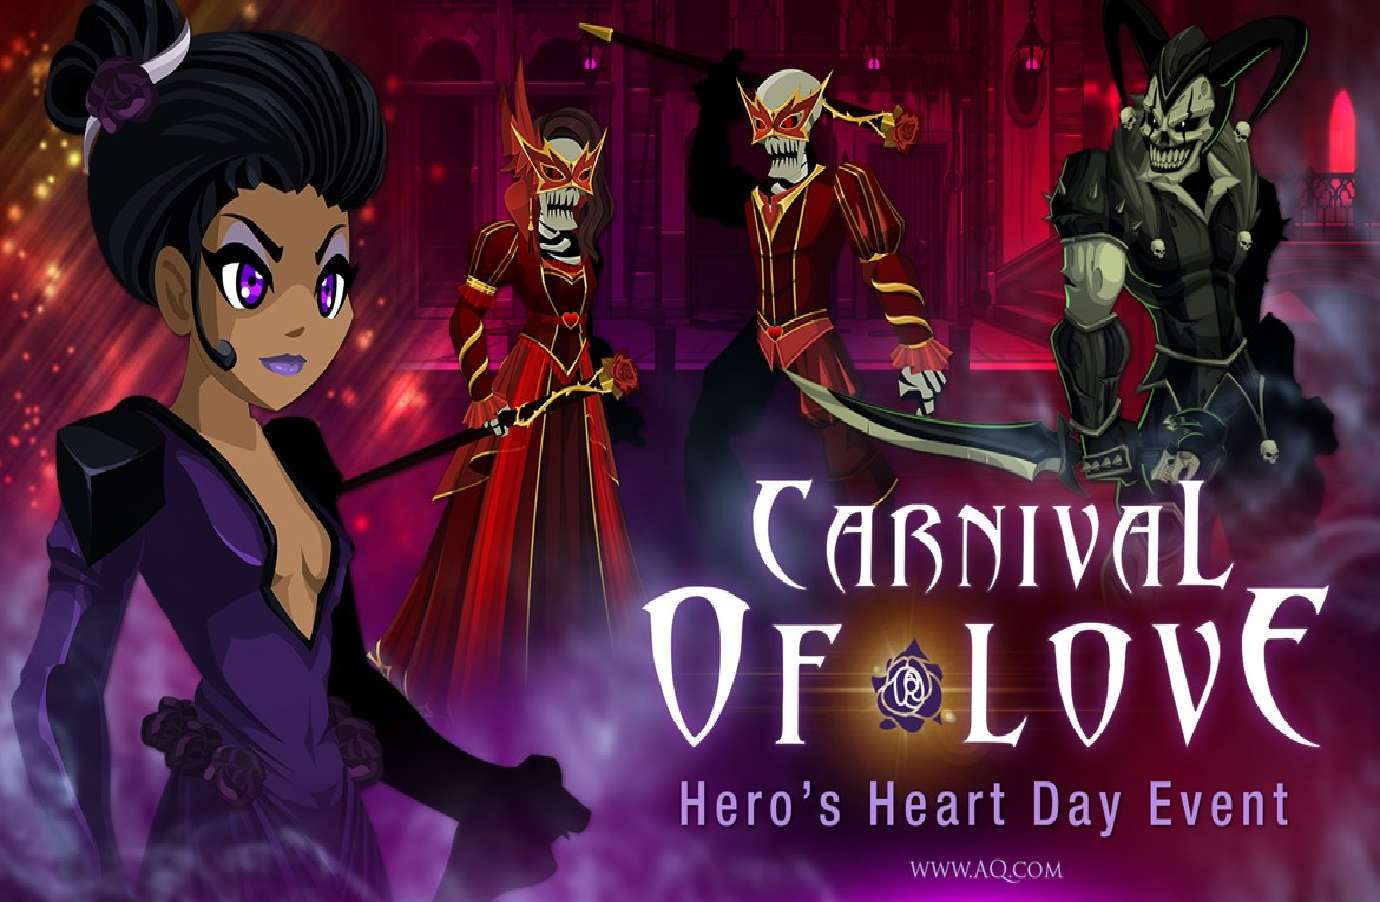 AdventureQuest Worlds Brings In Carnaval Of Love As An Event Related To Carnaval To Give Players A Reason To Party